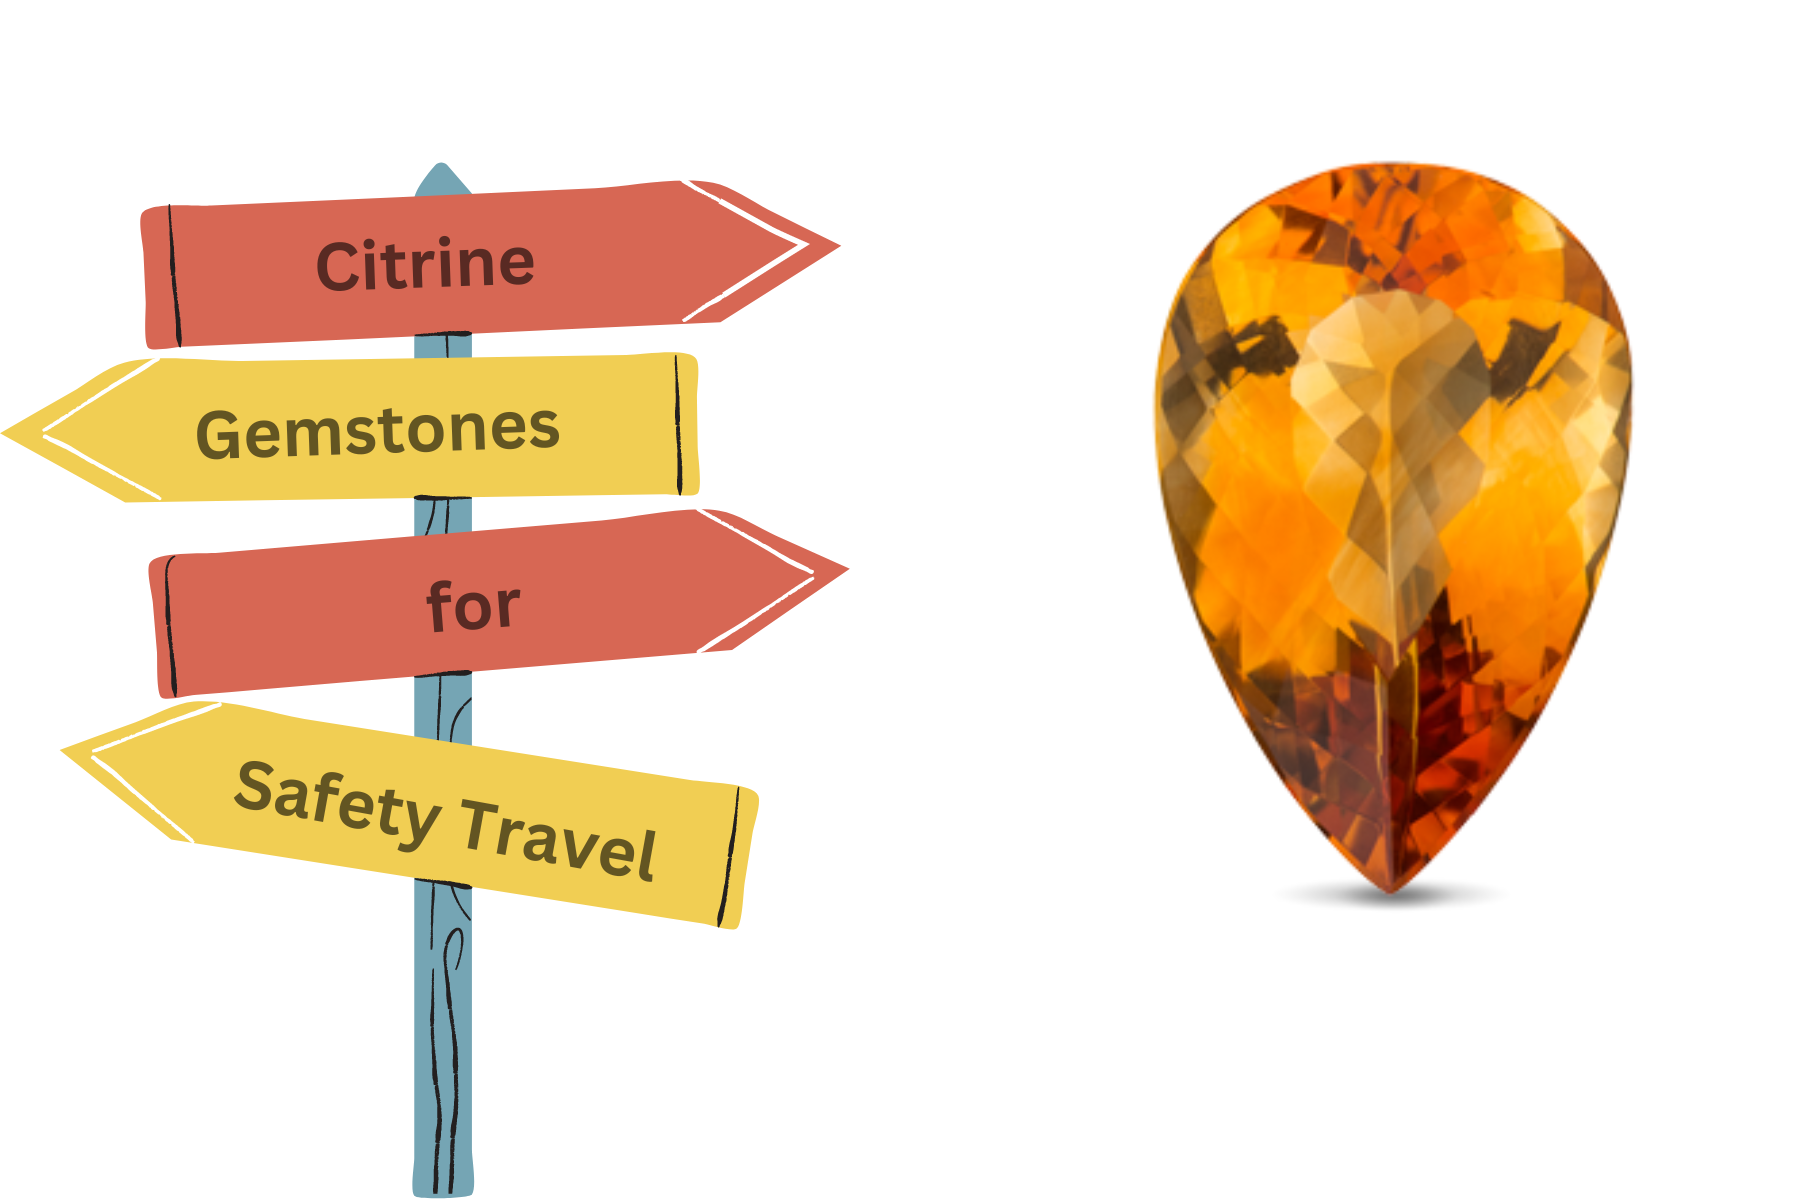 Citrine gemstone and wooden posts with the words "Citrine Gemstones for Safety Travel"